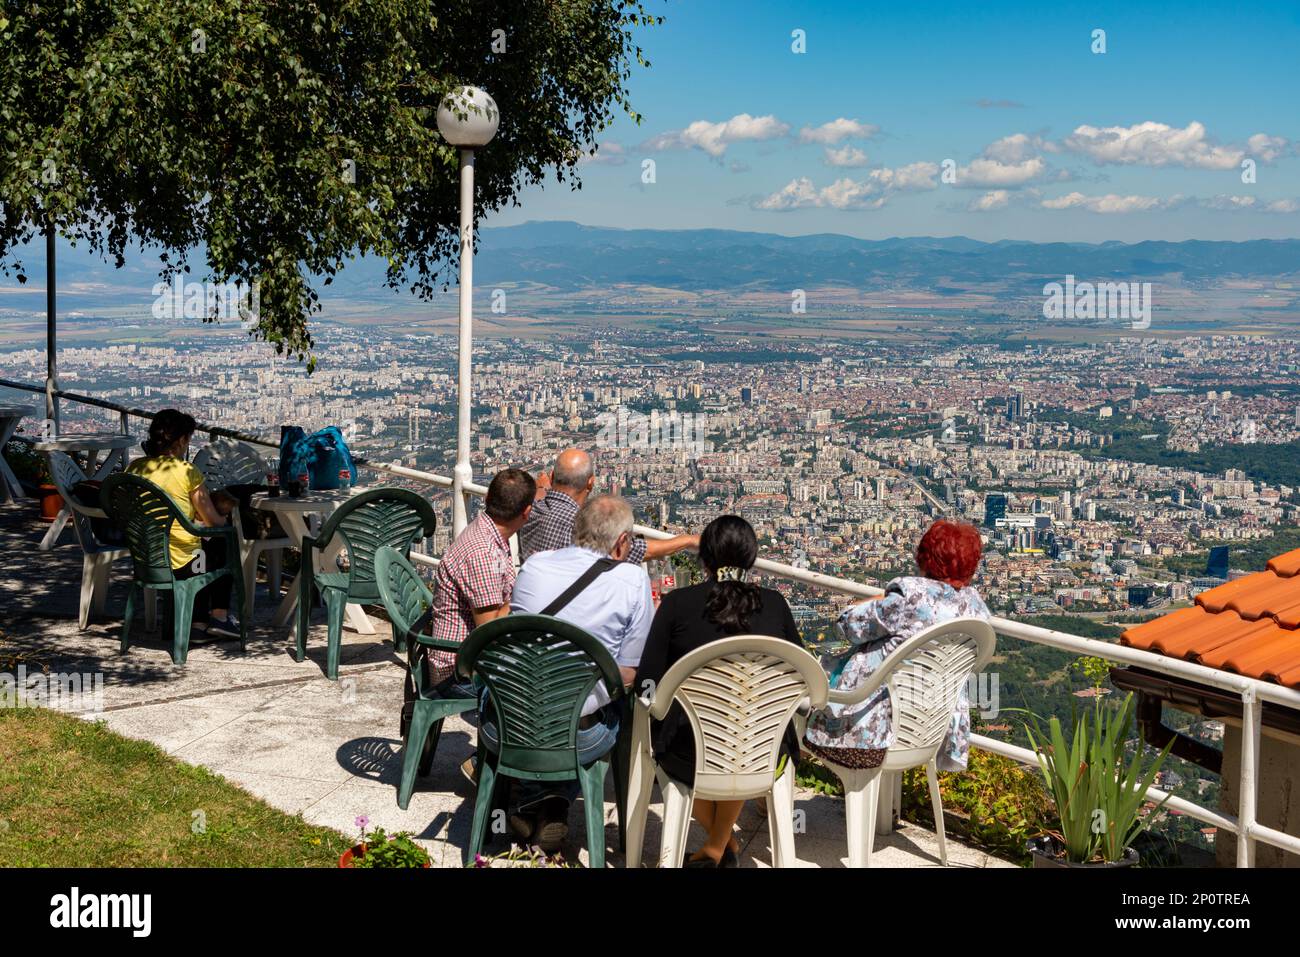 People looking the view of Sofia from a cafe high up on Vitosha mountain, Bulgaria Stock Photo